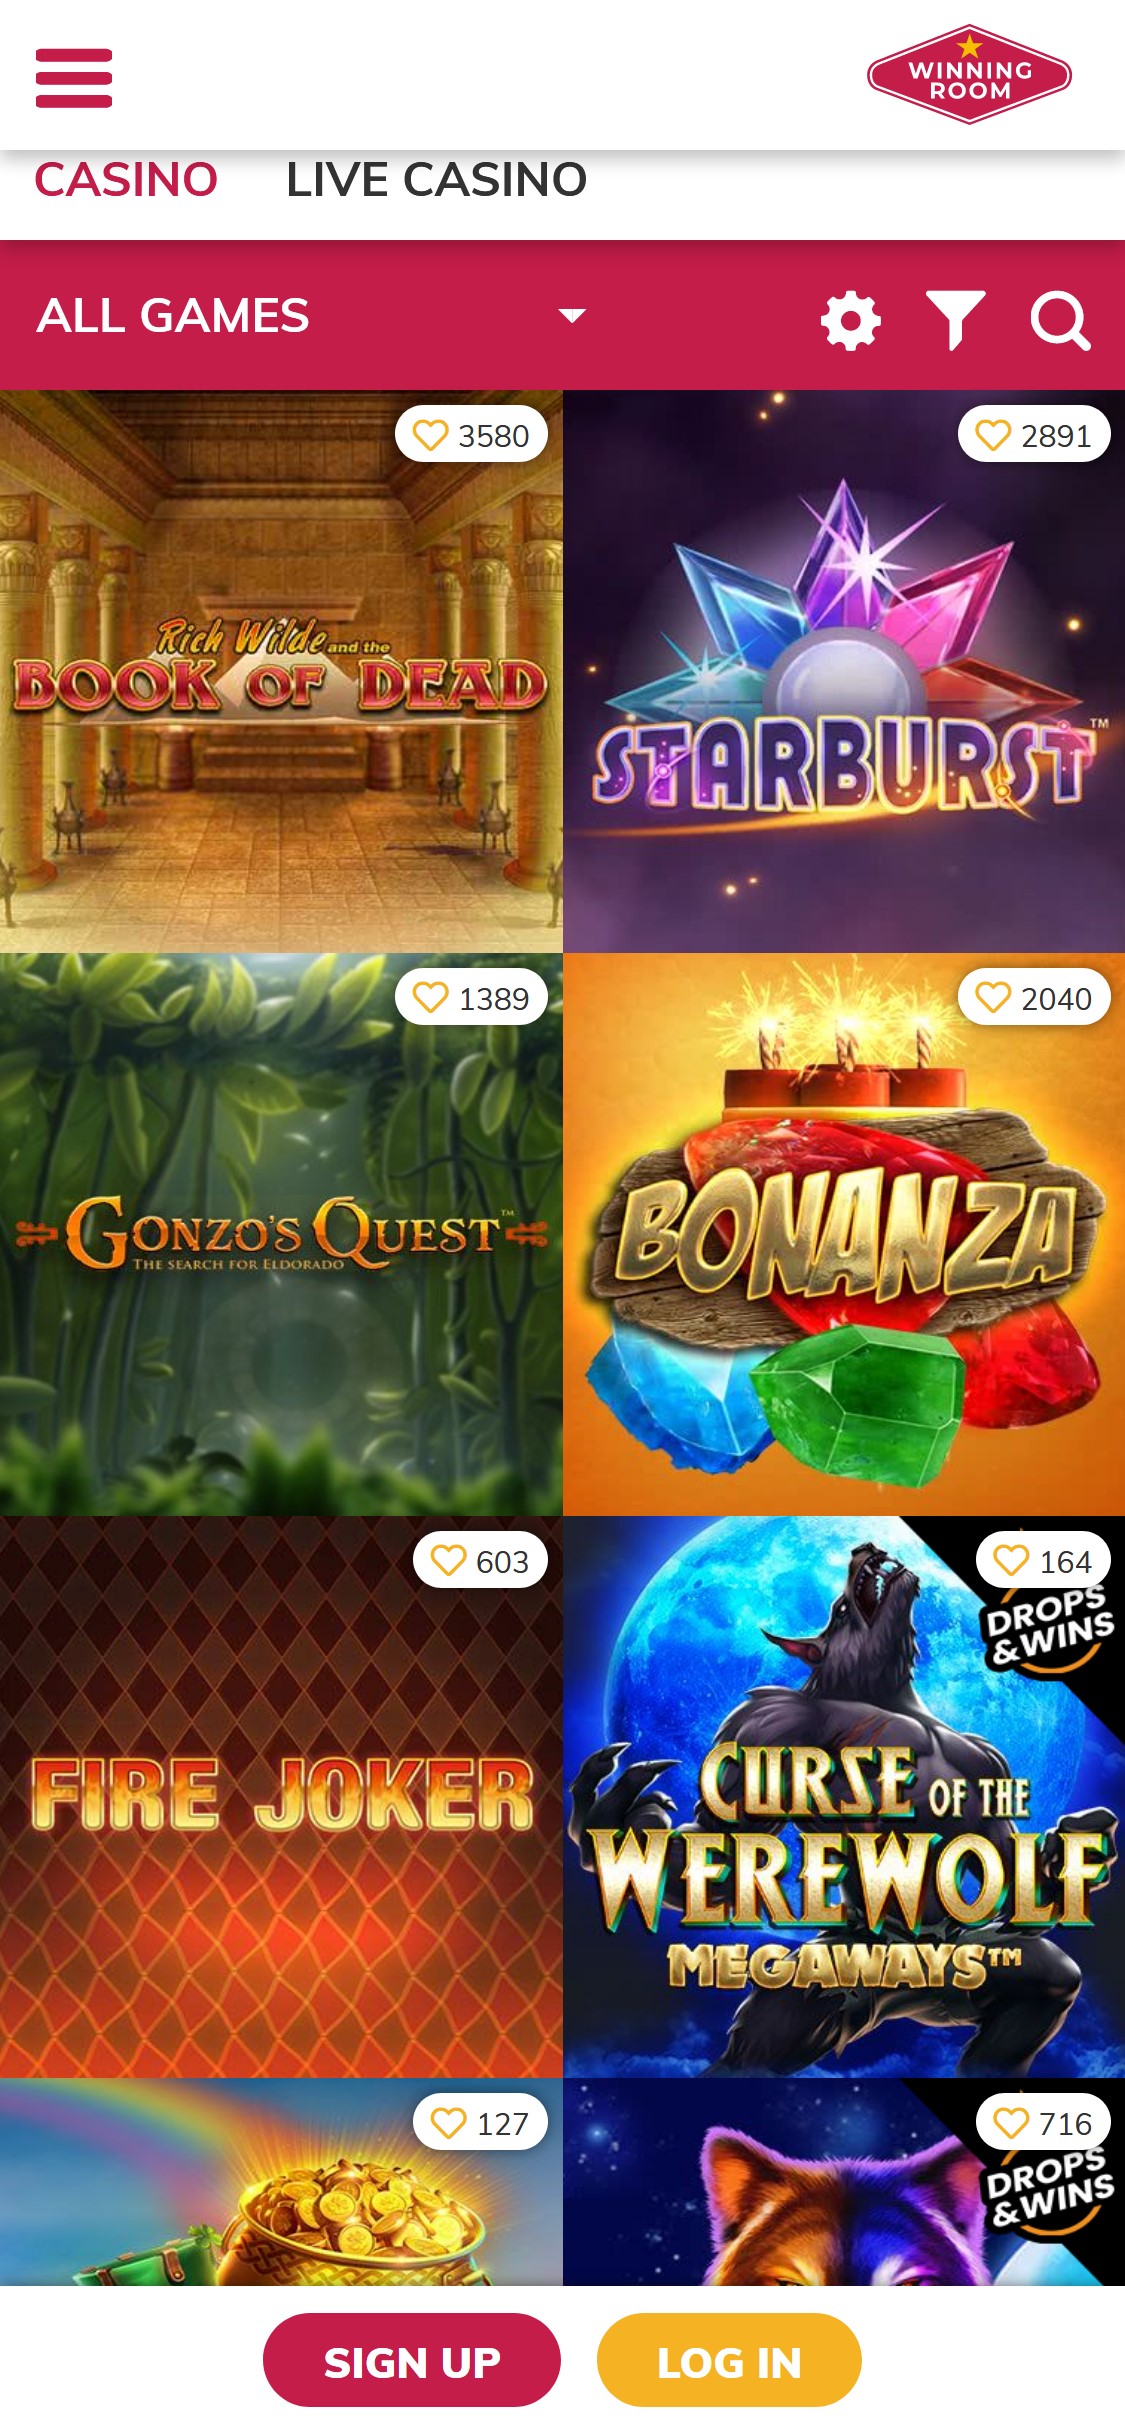 Winning Room Casino Mobile Games Review